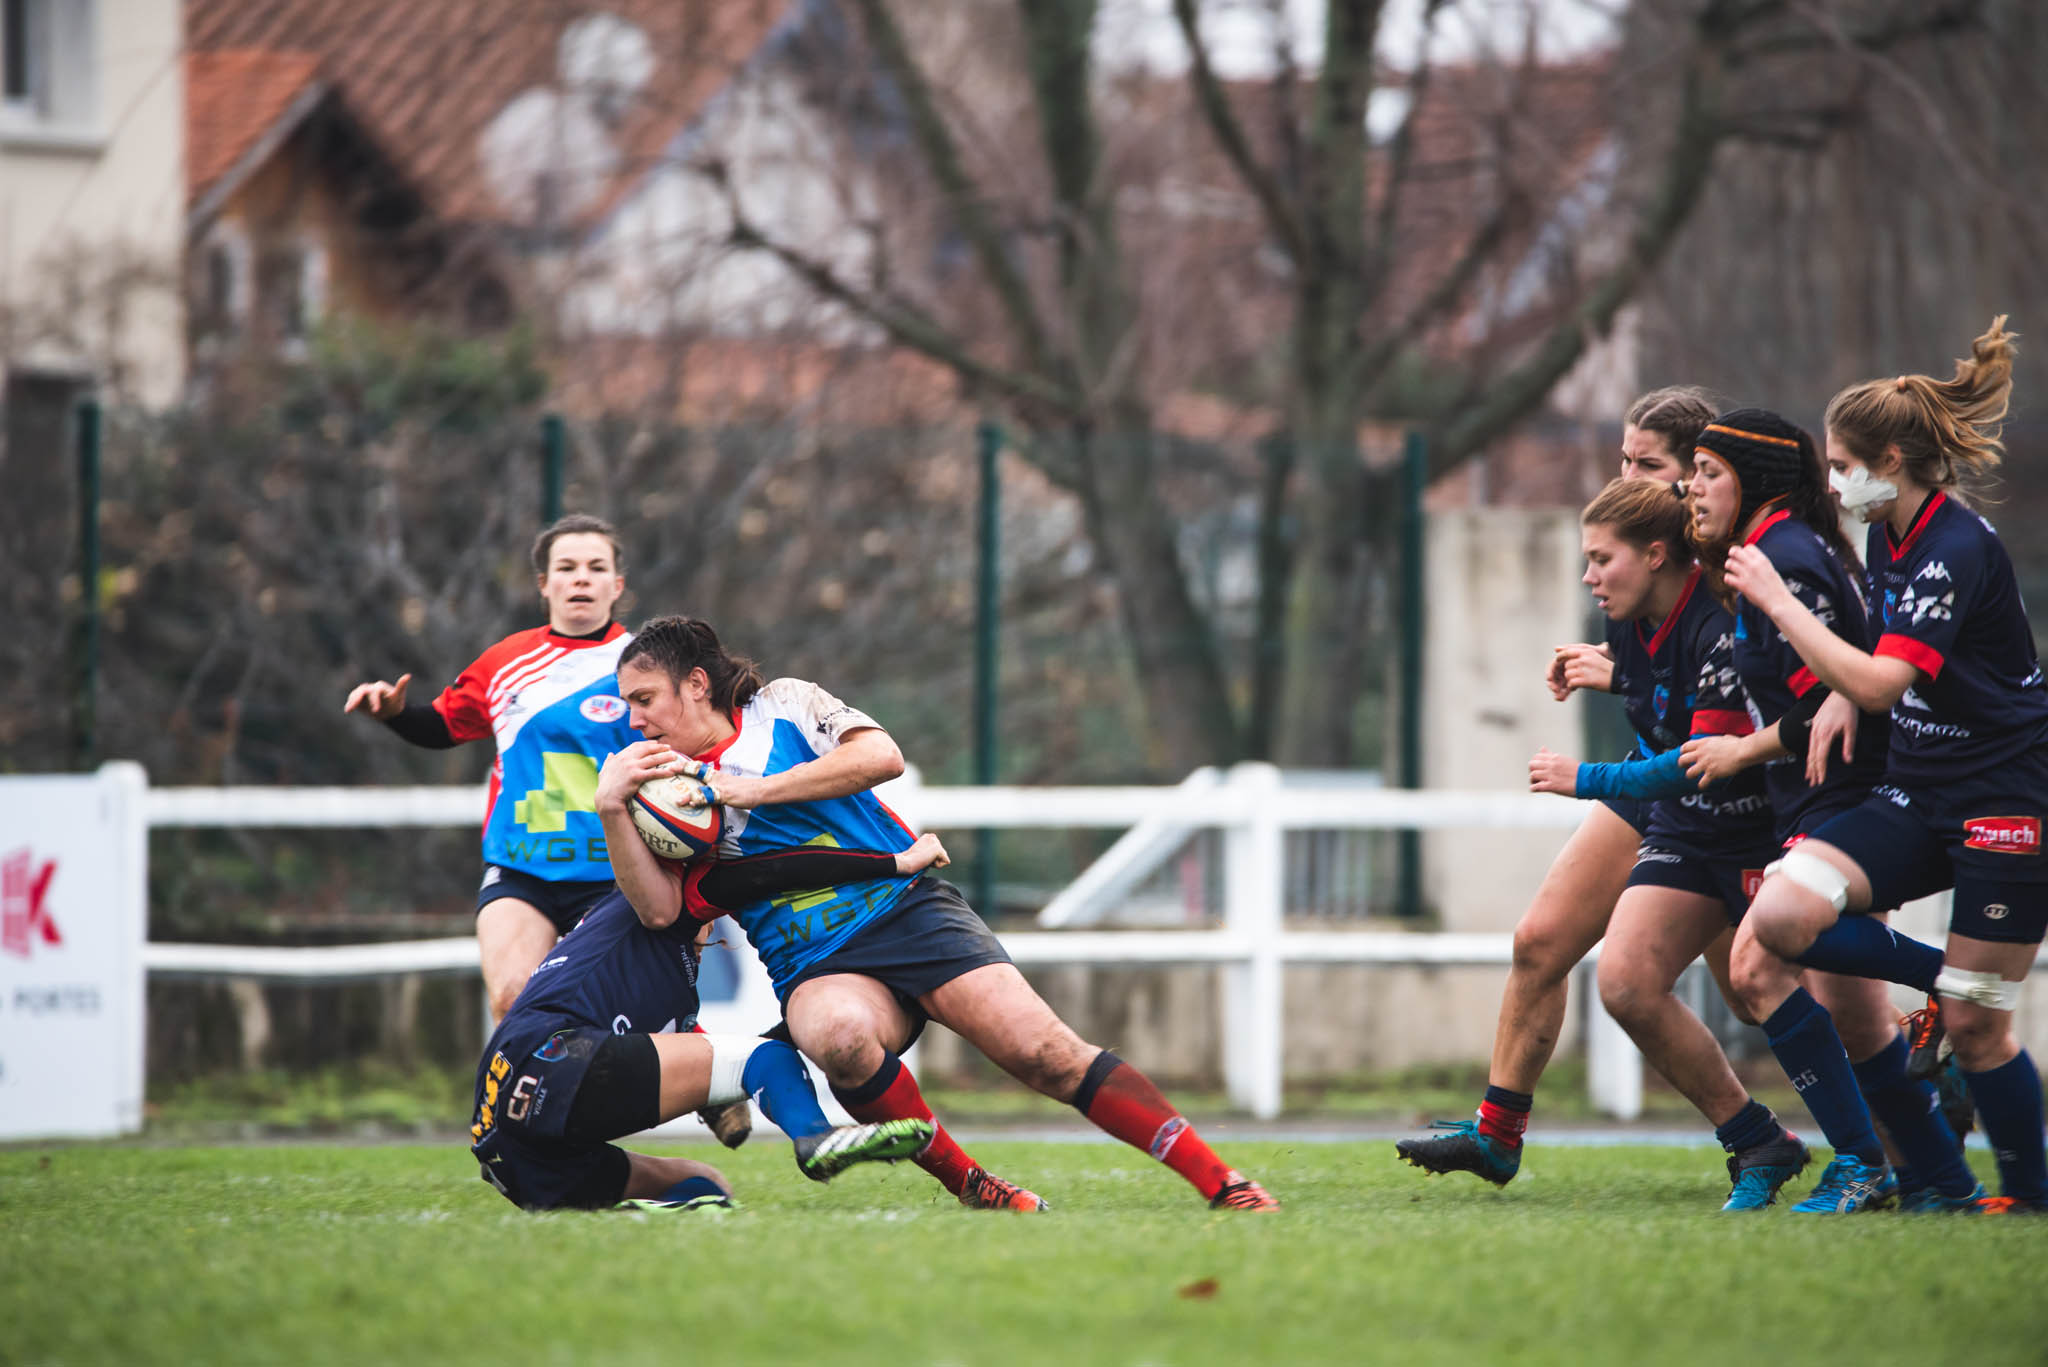 1812_Rugby_Bron-18